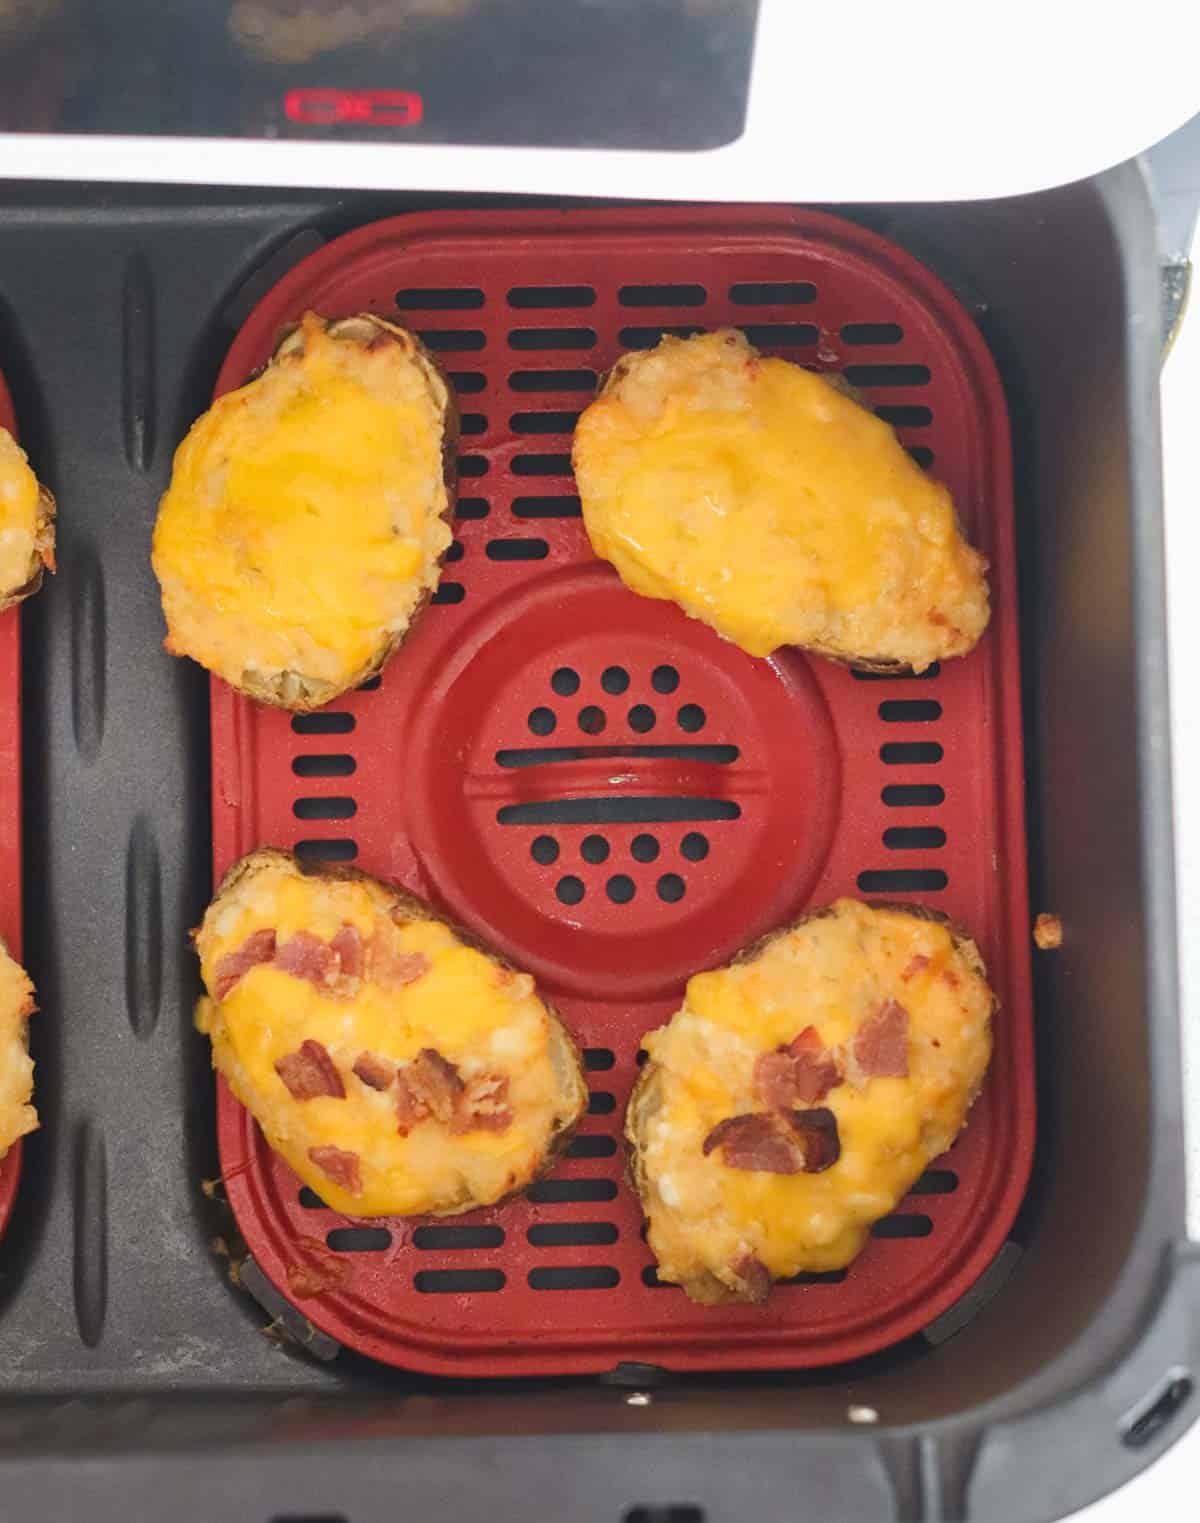 four twice baked potatoes, two topped with bacon, sitting in the basket of an air fryer after being cooked